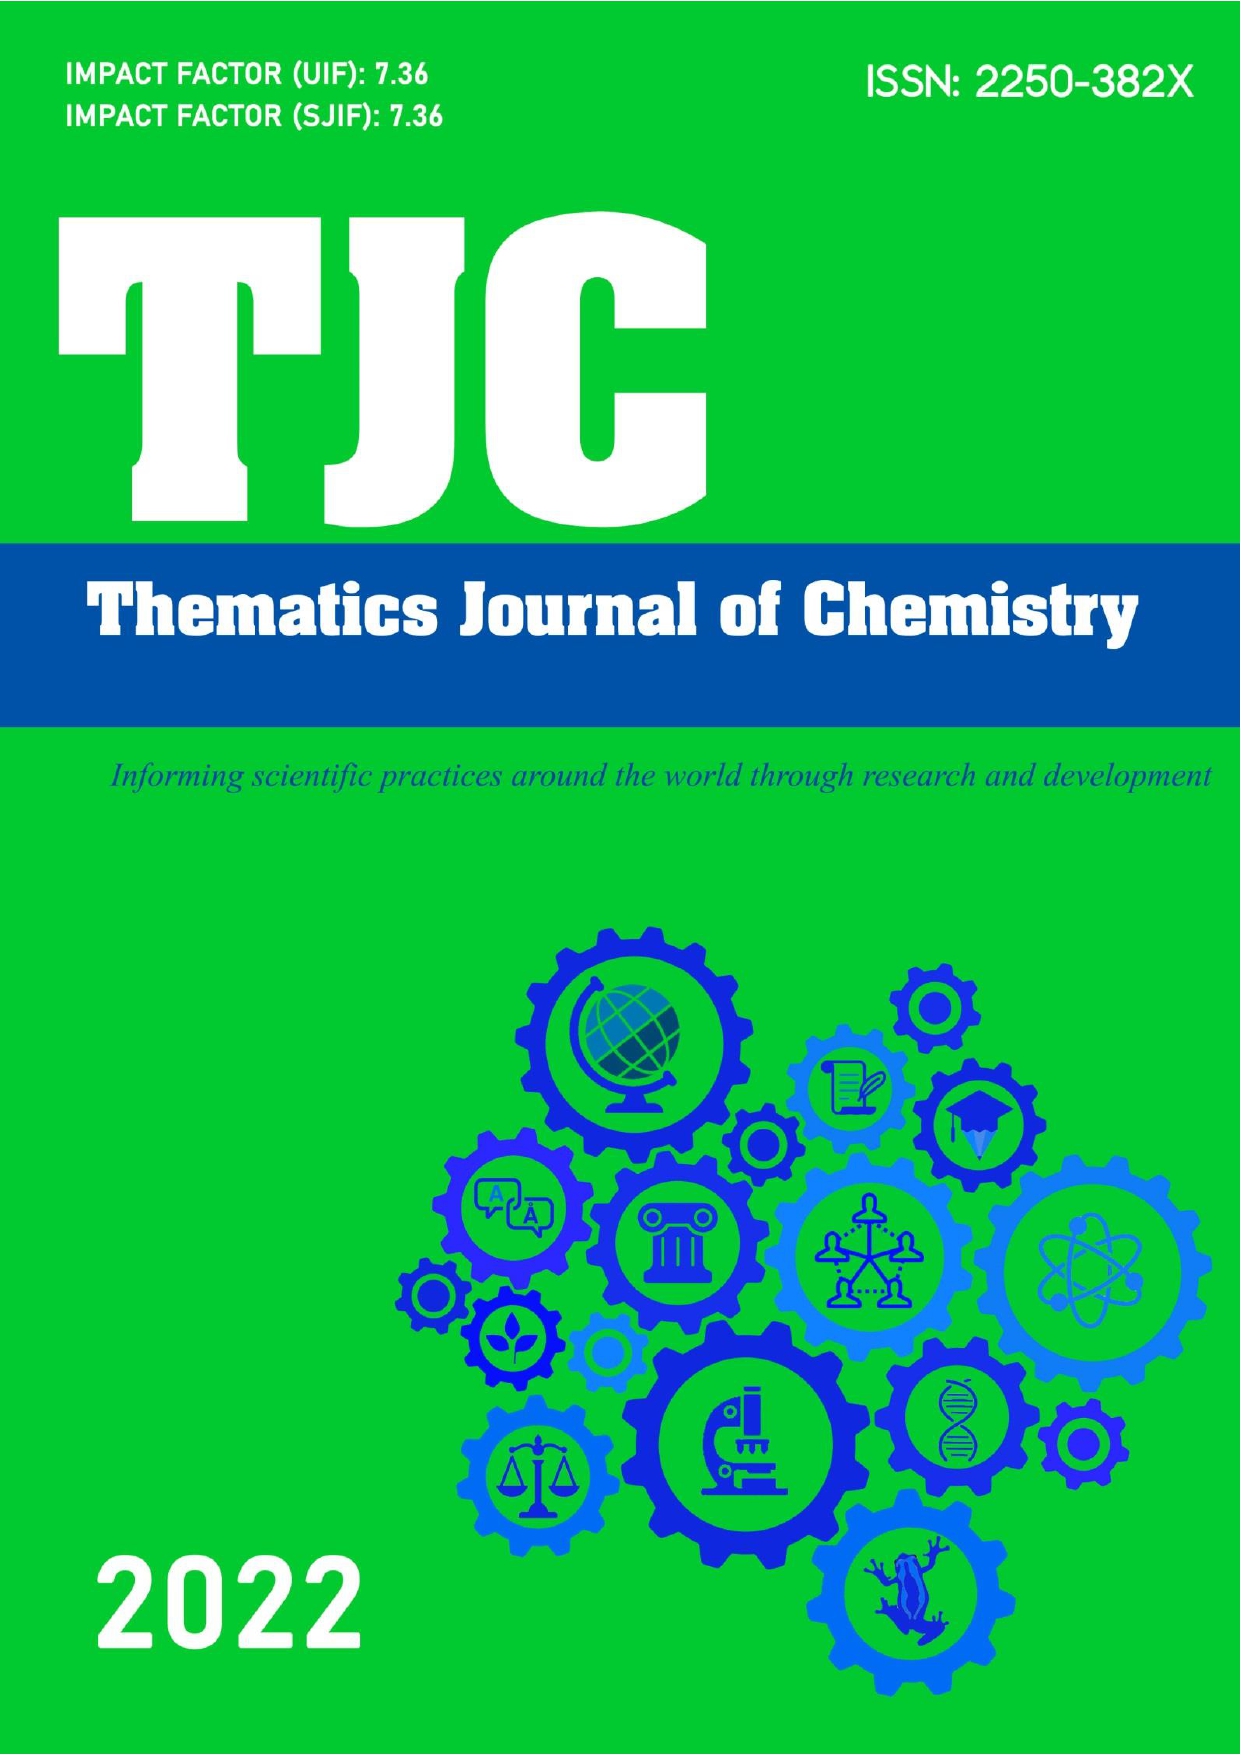 					View Vol. 6 No. 1 (2022): THEMATICS JOURNAL OF CHEMISTRY
				